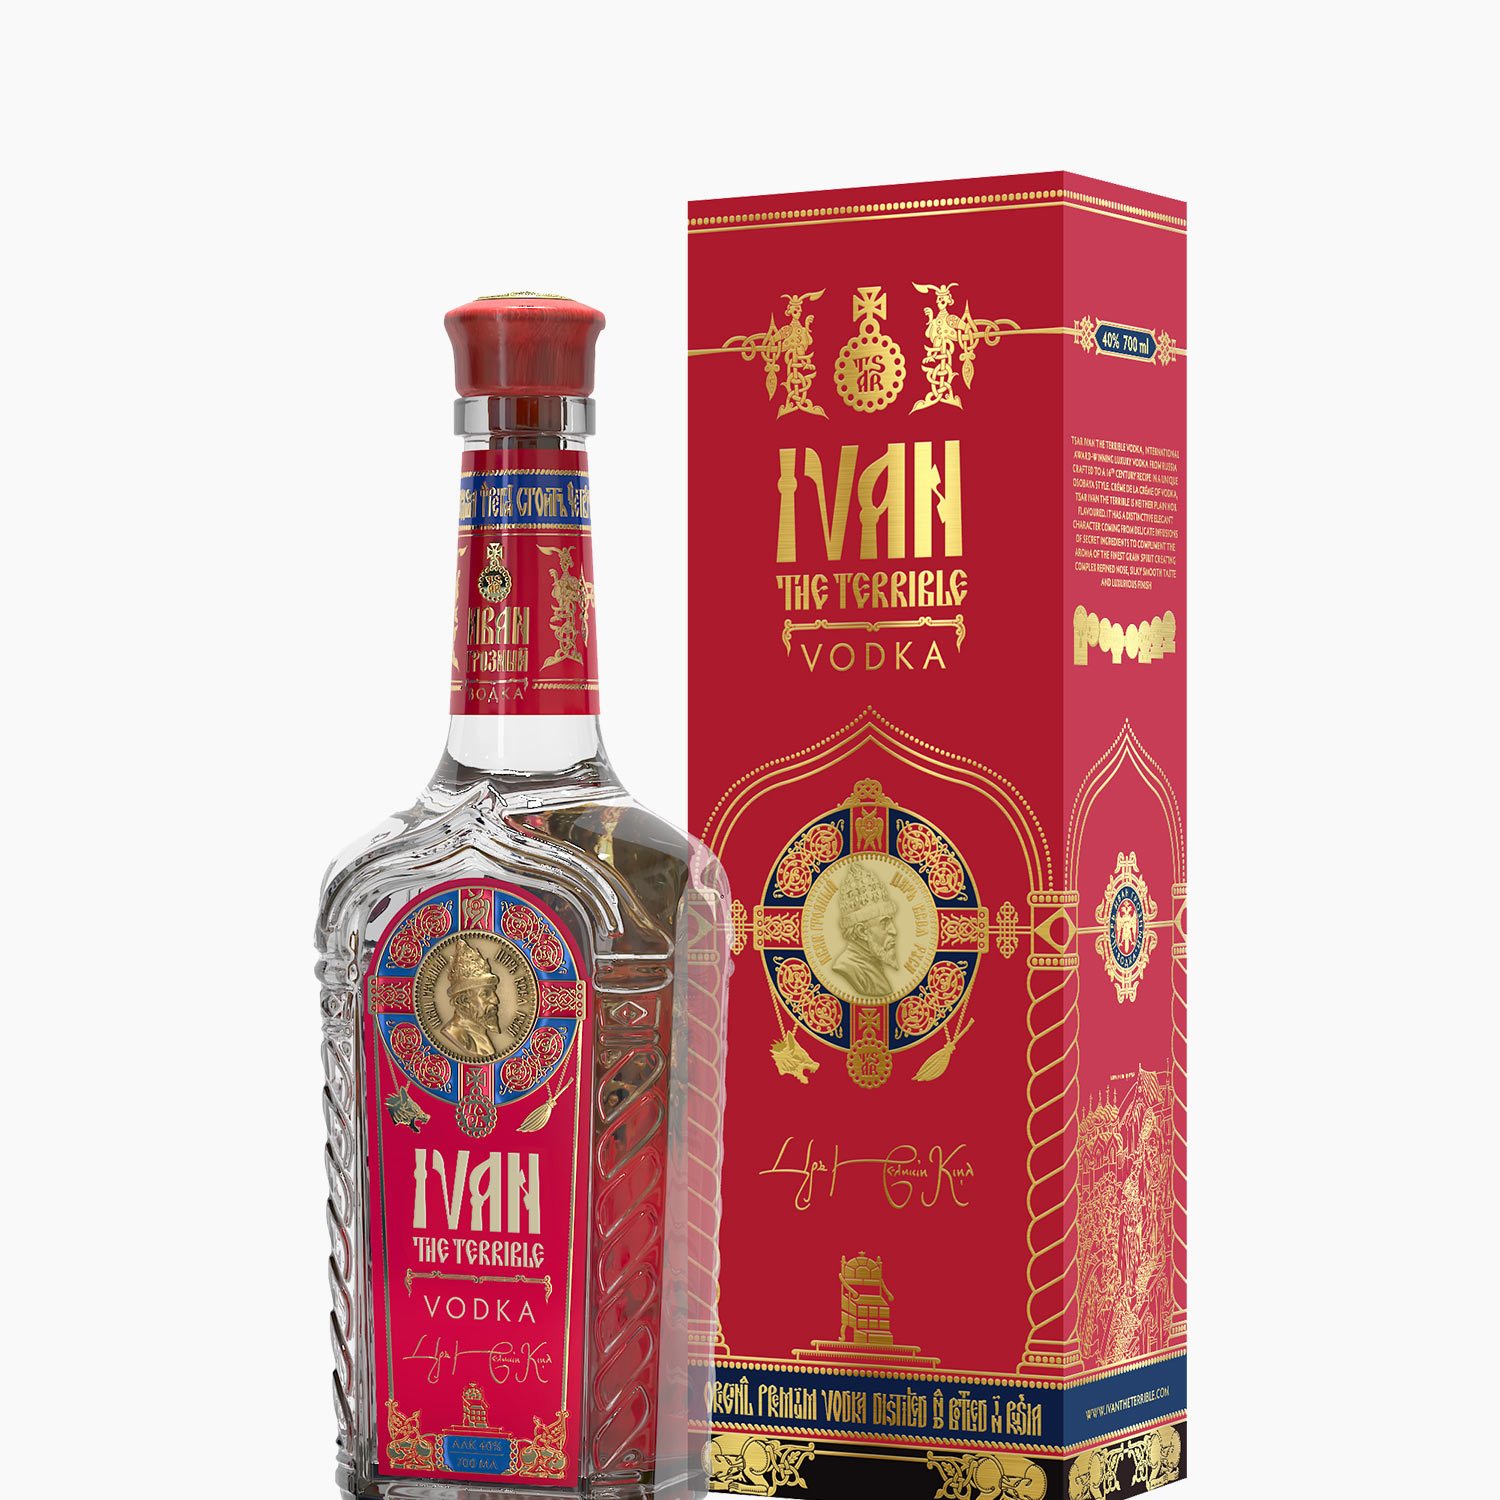 Ivan The Terrible gift pack